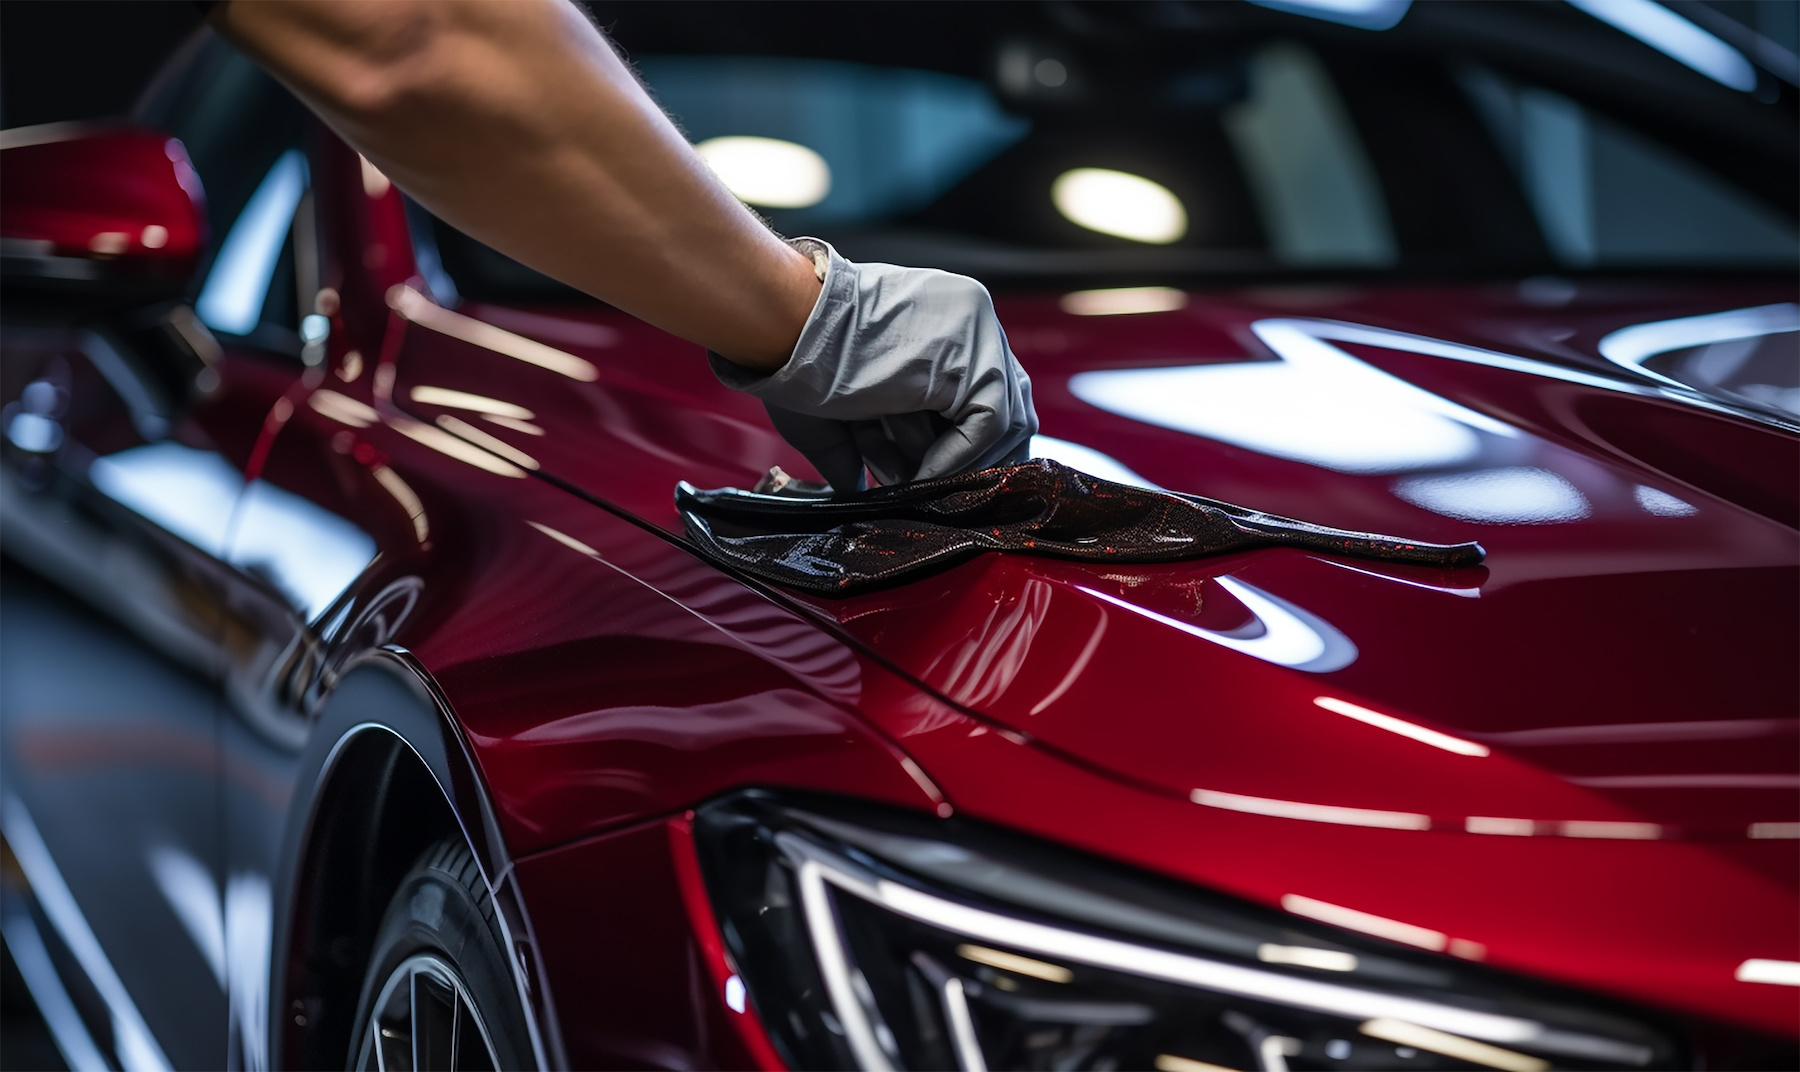 What is Ceramic Coating: Do you really need it? 